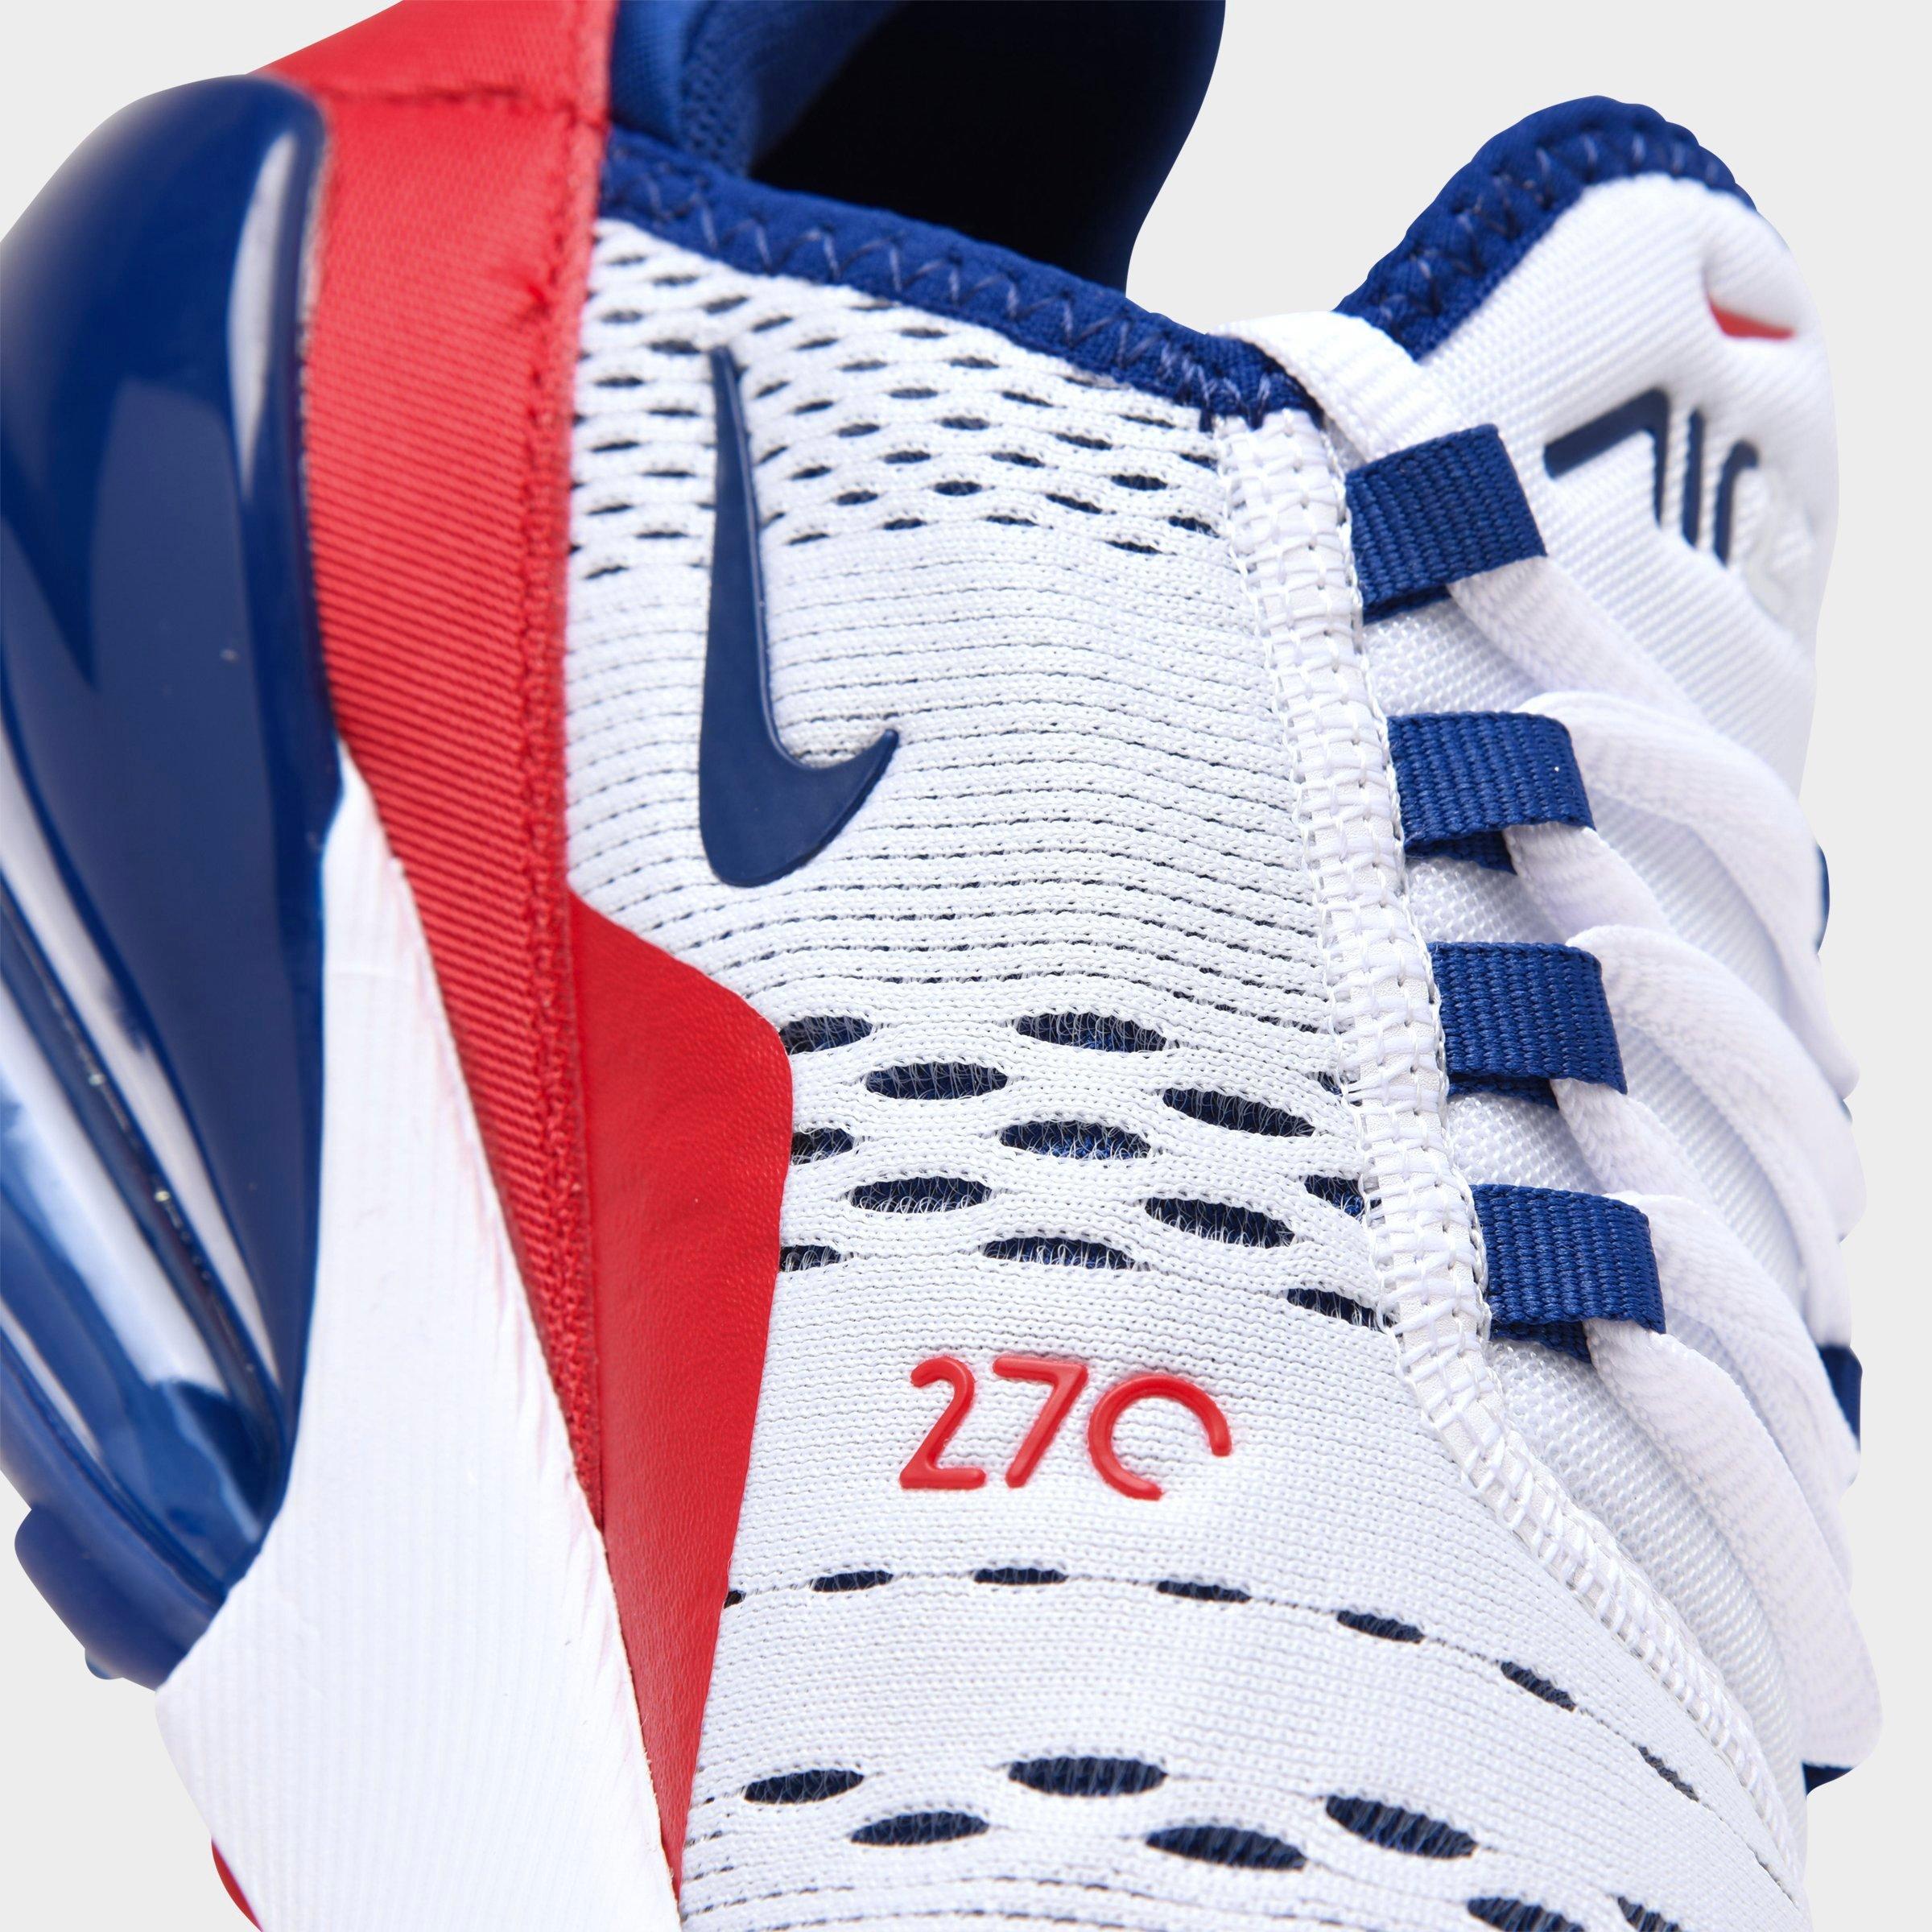 mens nike air max 270 red white and blue